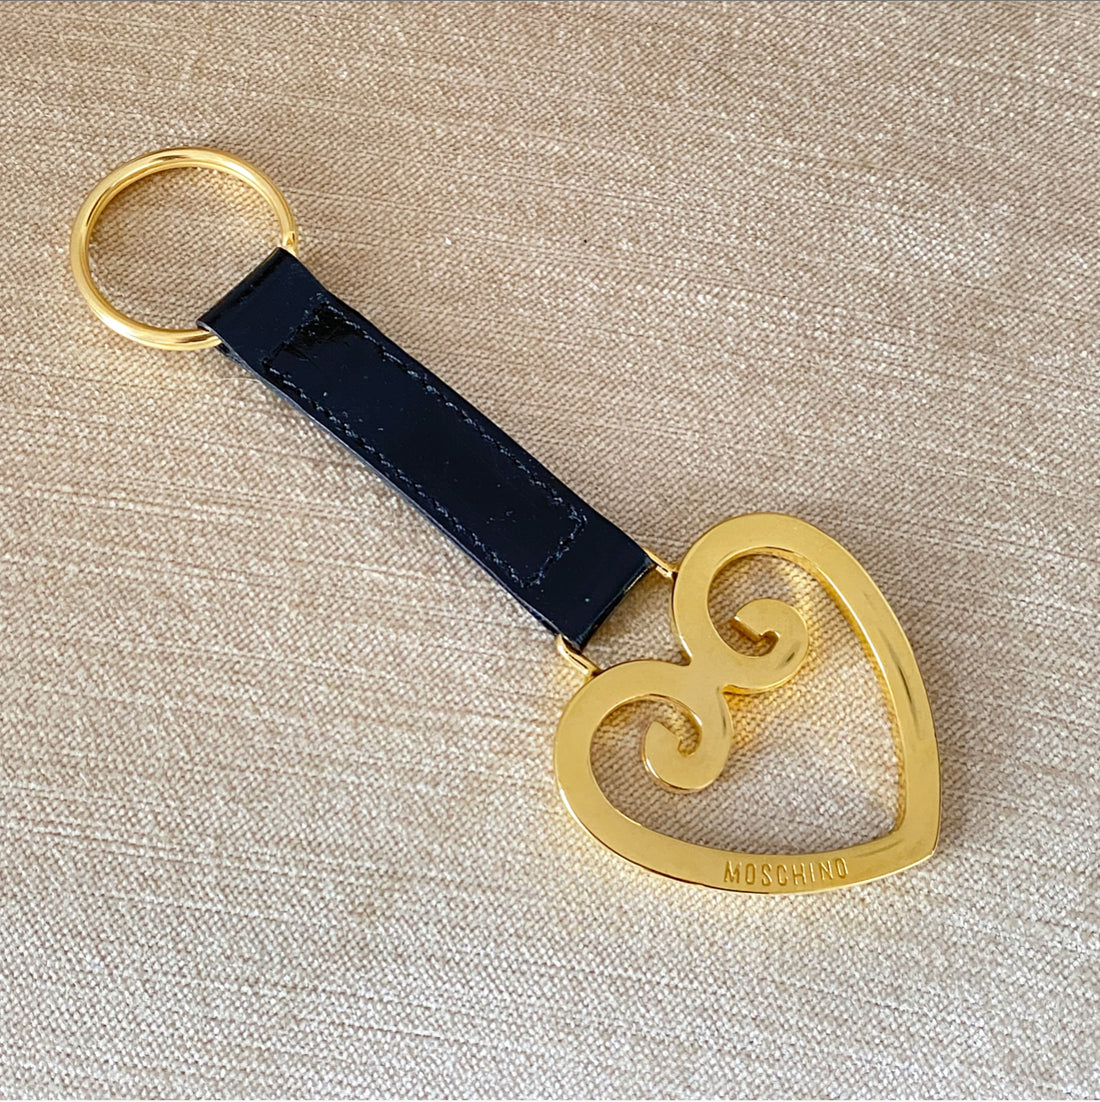 Moschino Vintage 1990’s Heart Shaped Key Ring Holder